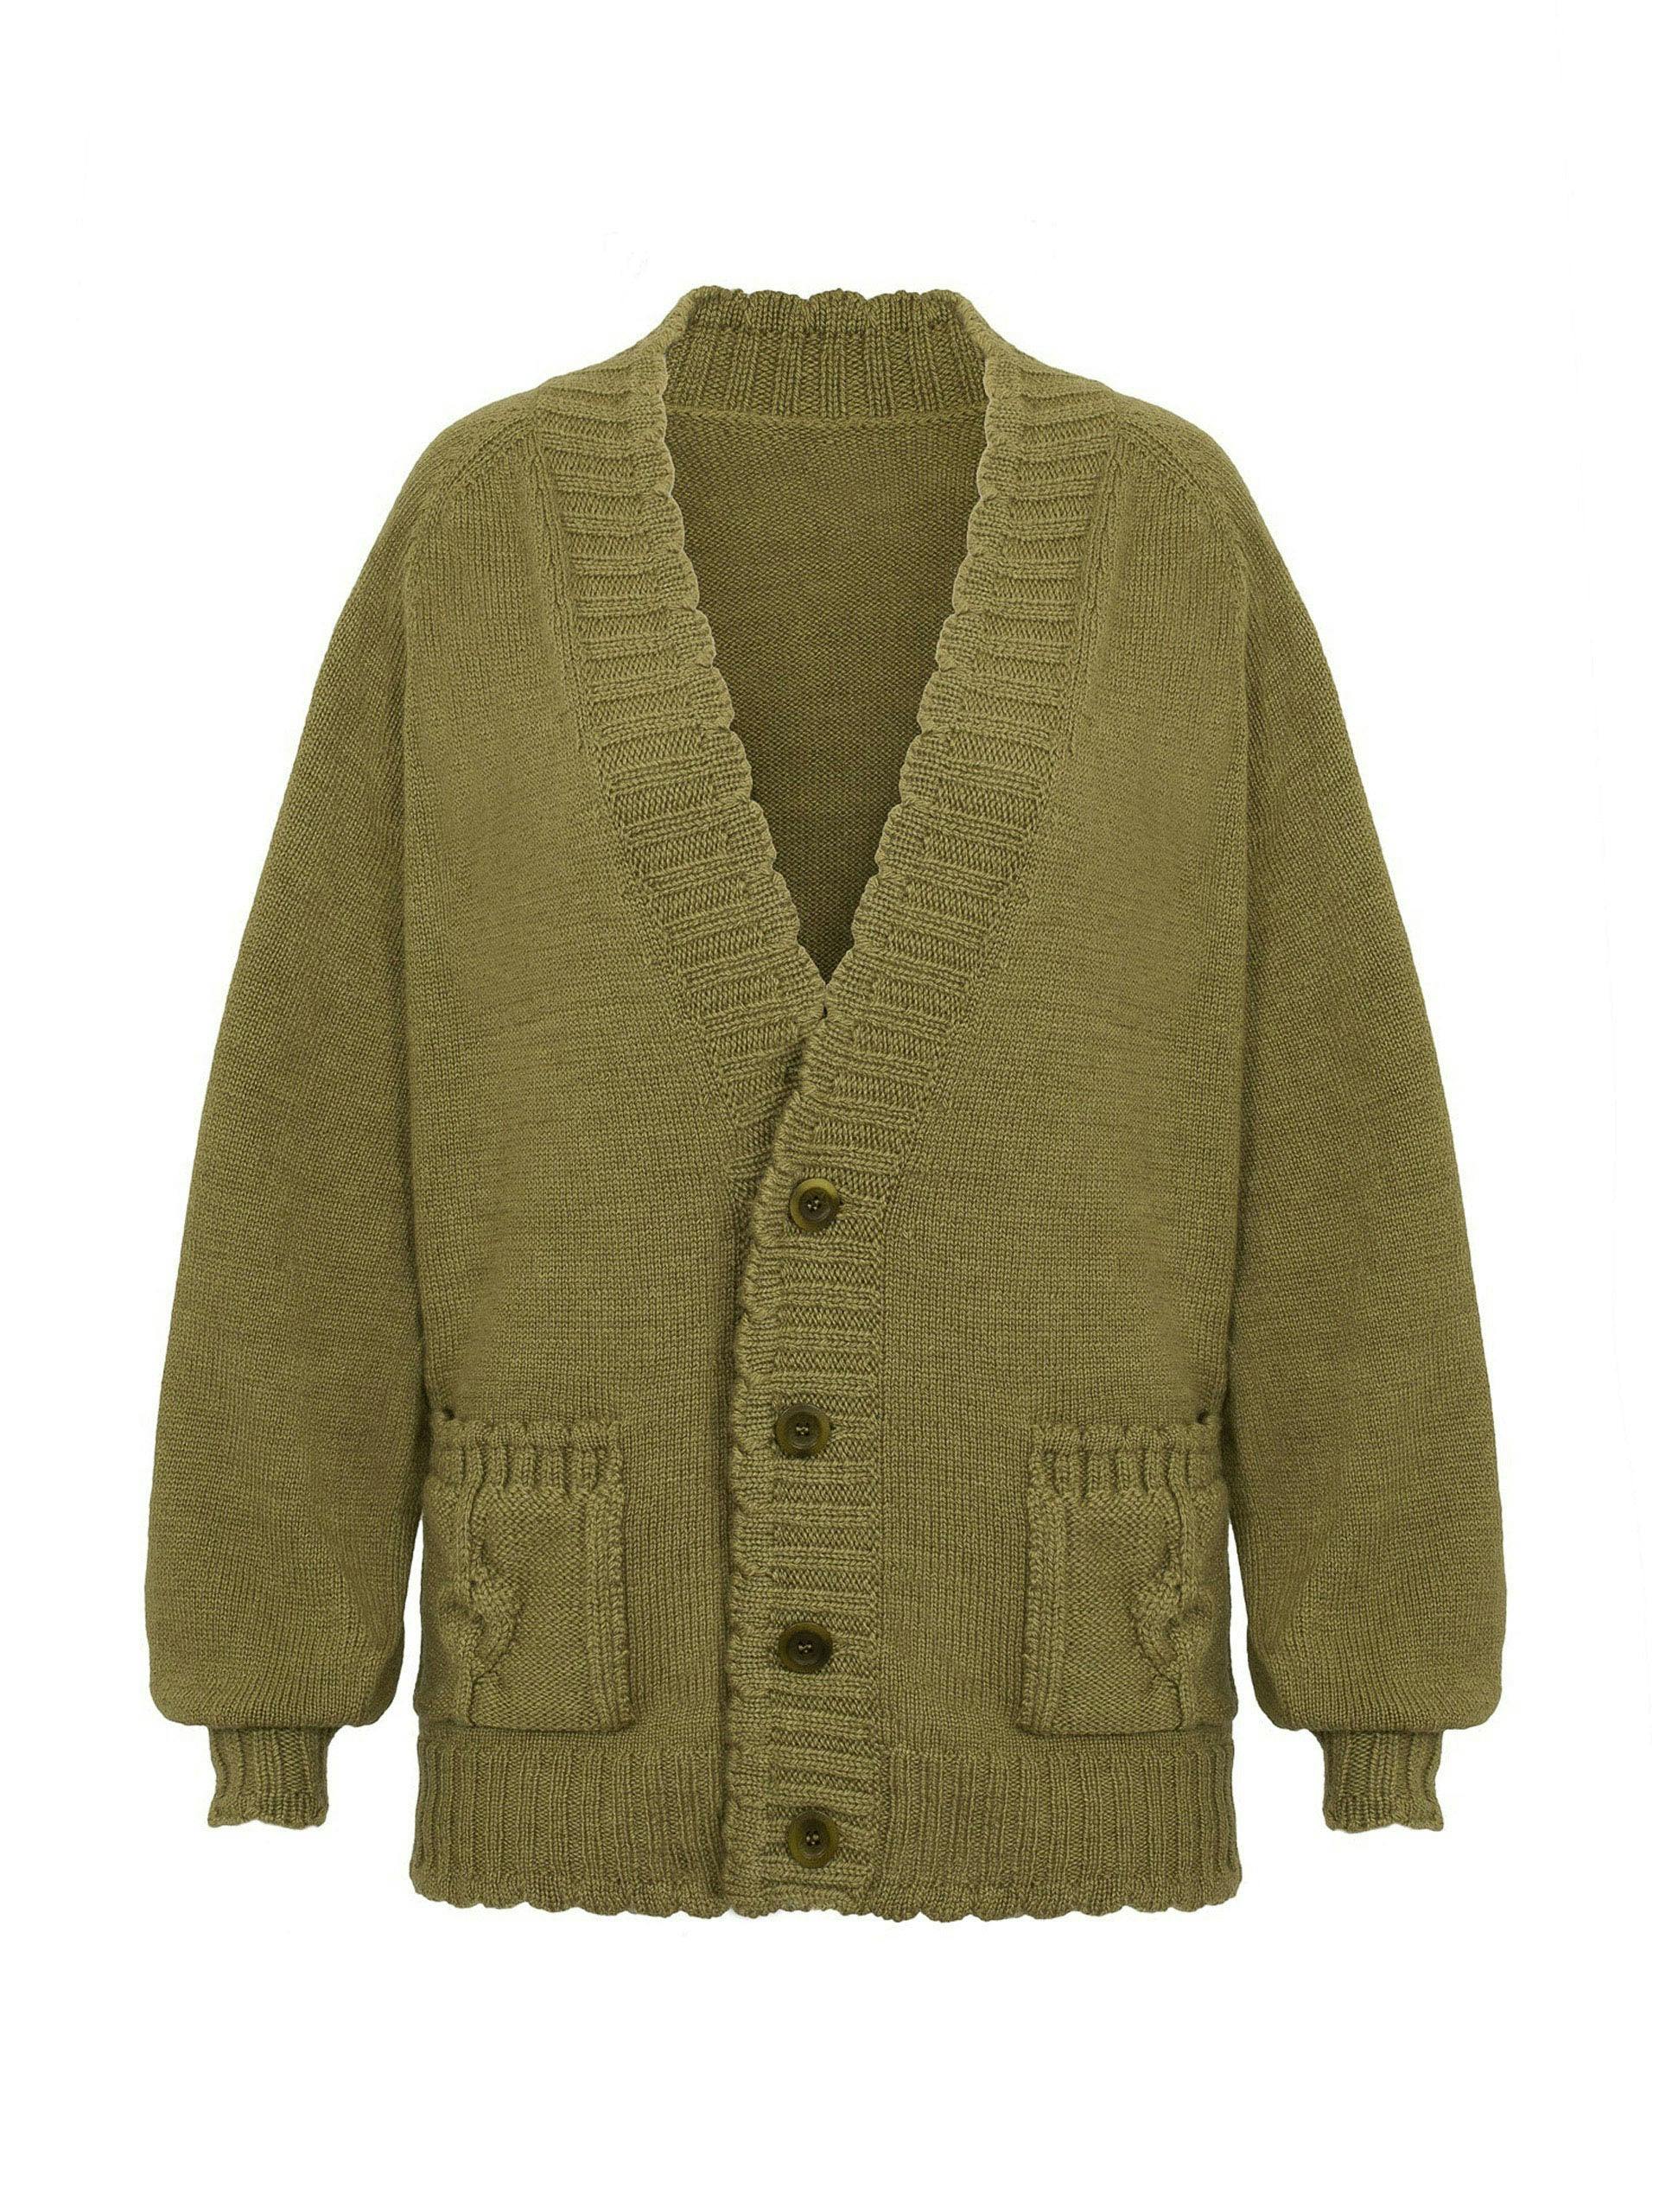 Green Elswick knitted cardigan